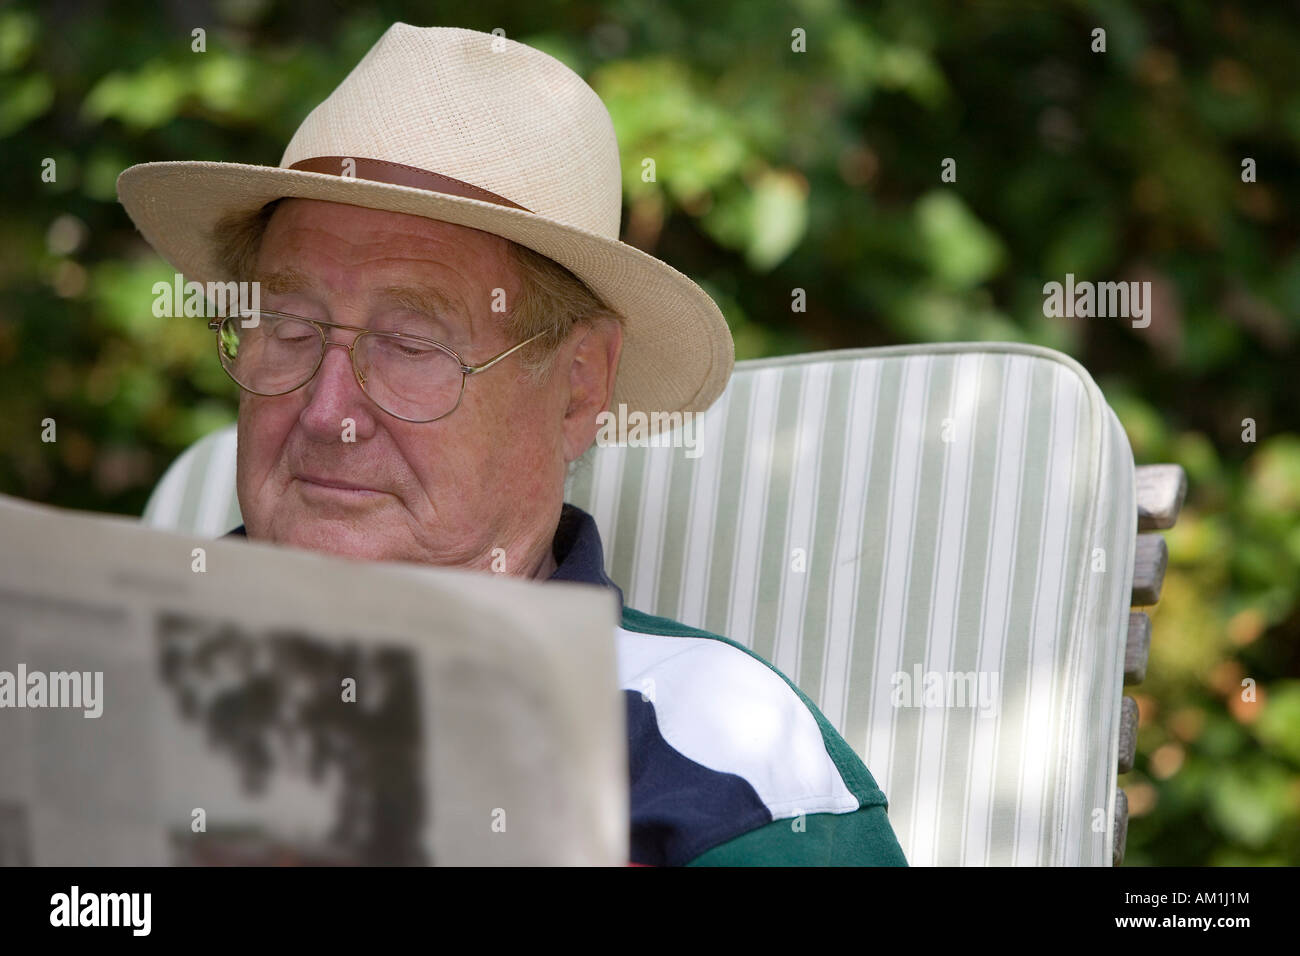 A relaxing senior citizen sitting in the garden reading a newspaper Stock Photo